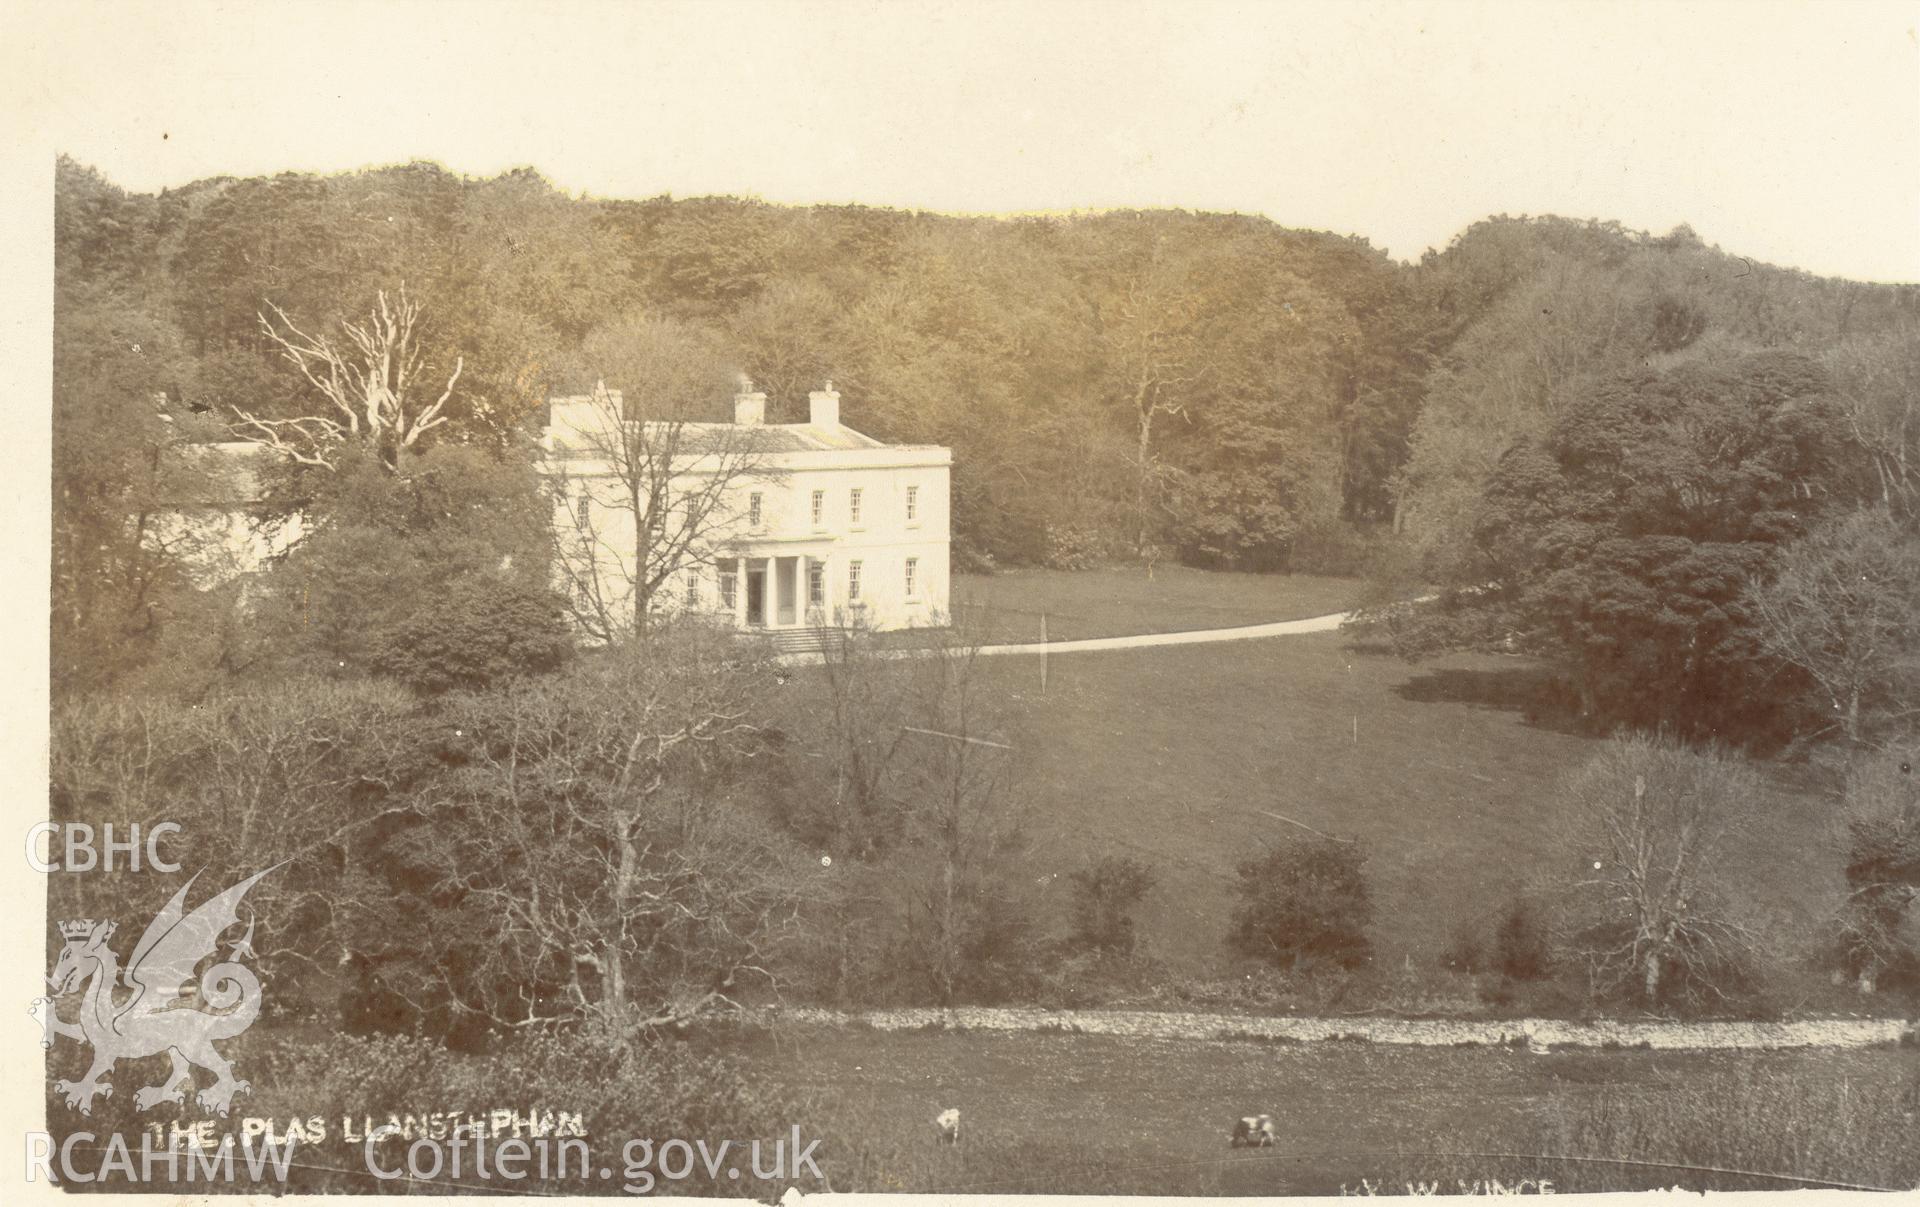 Digitised postcard image of The Plas, Llansteffan. Produced by Parks and Gardens Data Services, from an original item in the Peter Davis Collection at Parks and Gardens UK. We hold only web-resolution images of this collection, suitable for viewing on screen and for research purposes only. We do not hold the original images, or publication quality scans.